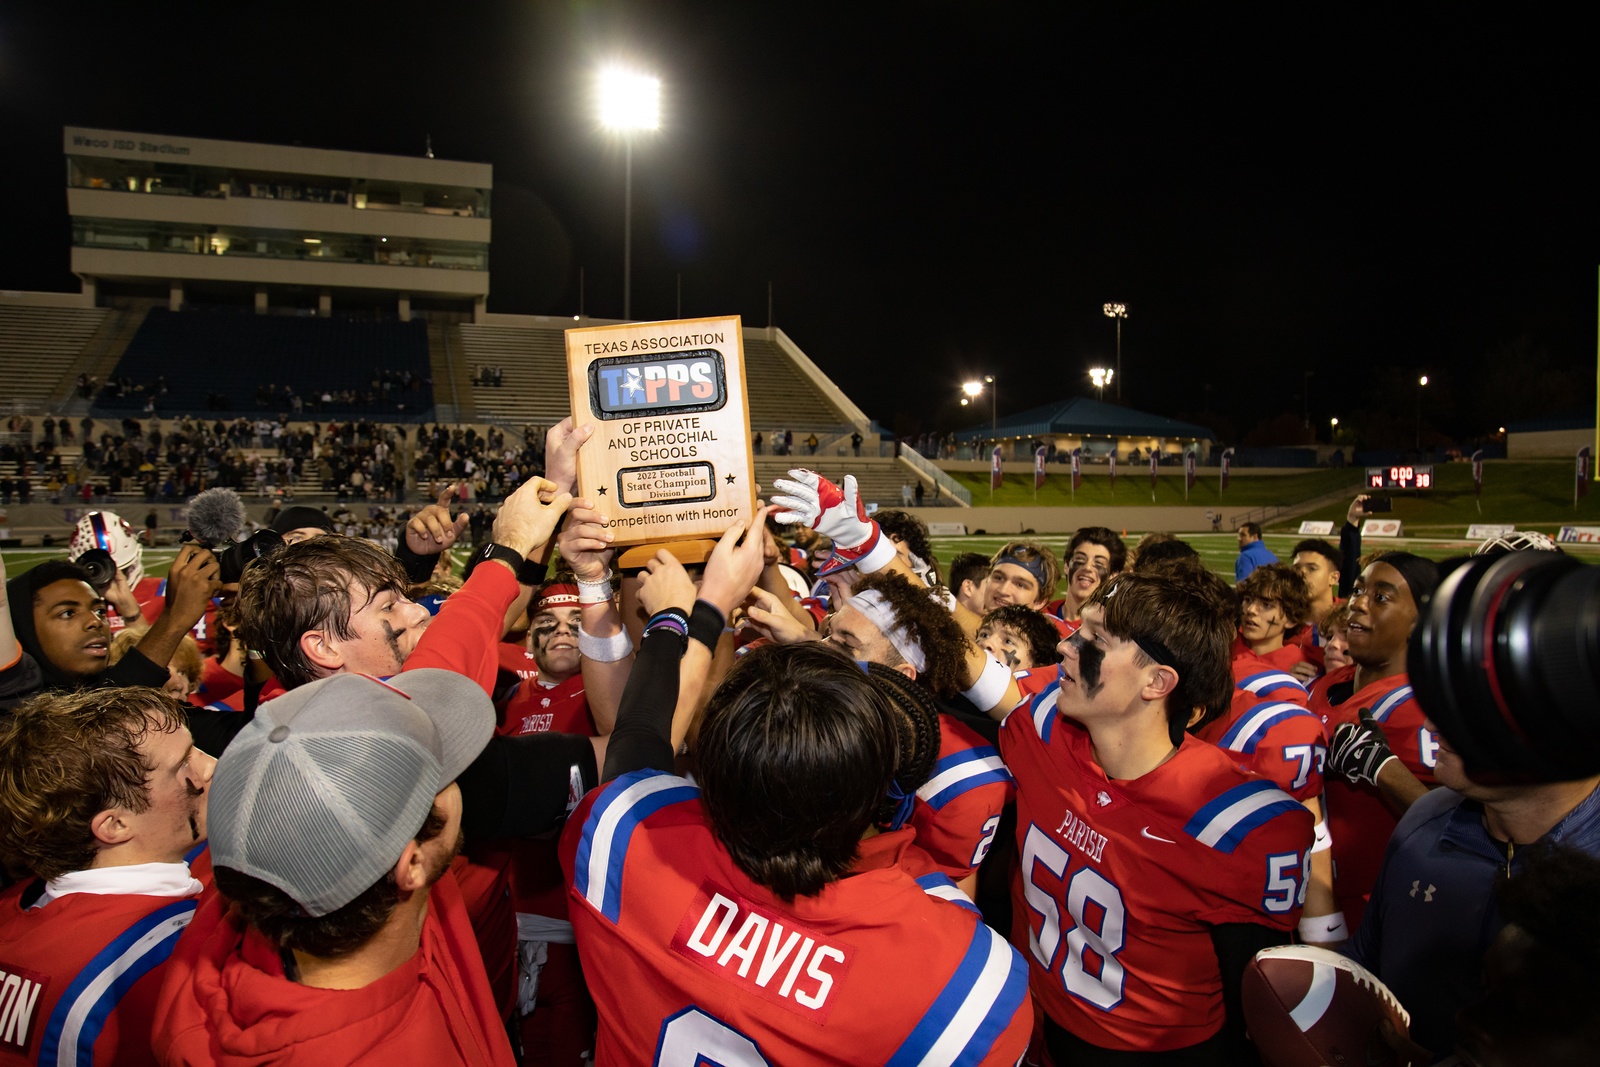 Parish Episcopal Wins FourthStraight TAPPS State Title